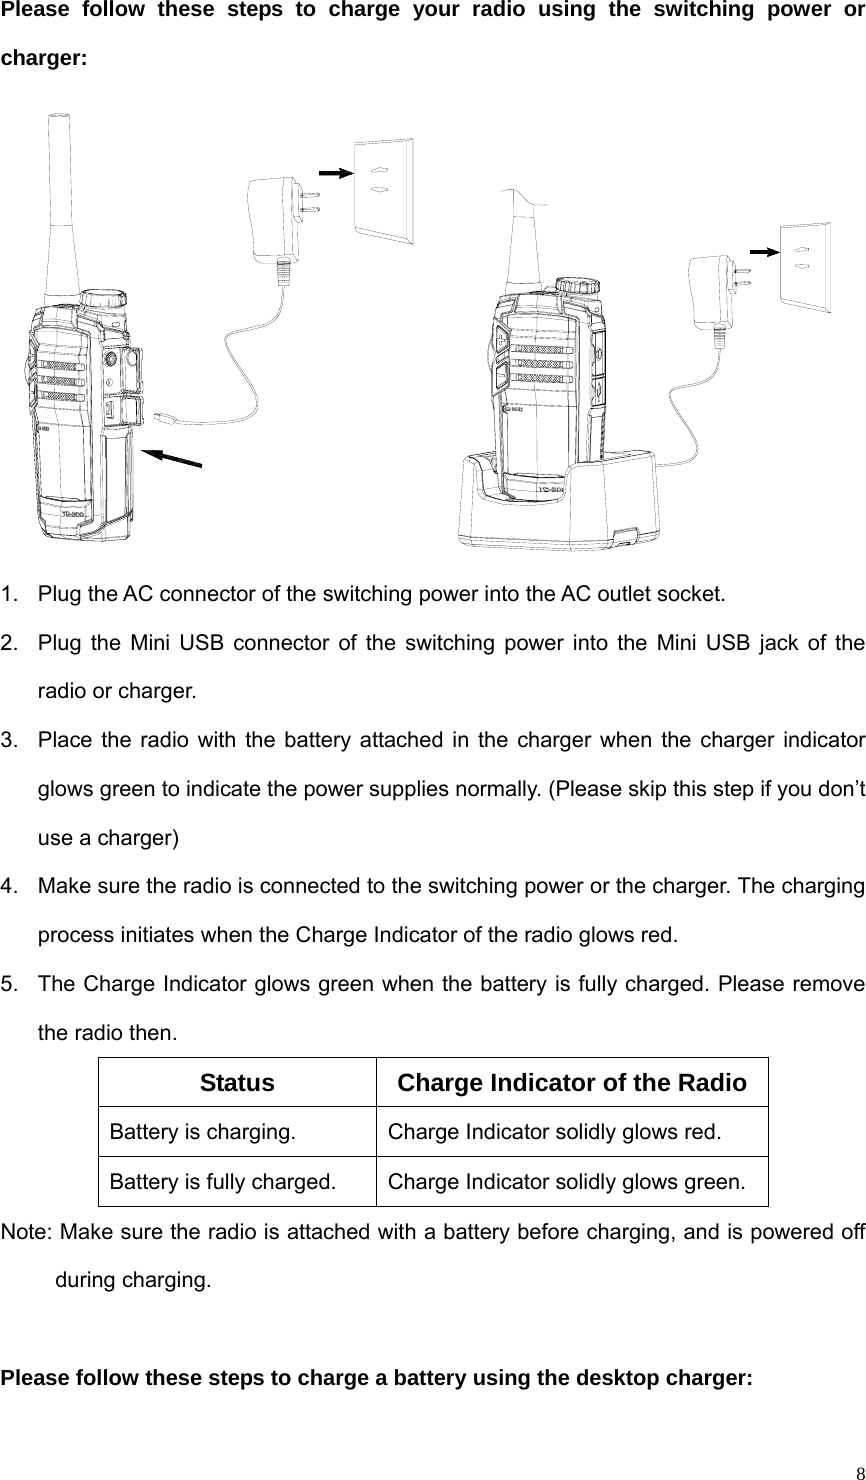   8Please follow these steps to charge your radio using the switching power or charger:      1.  Plug the AC connector of the switching power into the AC outlet socket. 2.  Plug the Mini USB connector of the switching power into the Mini USB jack of the radio or charger. 3.  Place the radio with the battery attached in the charger when the charger indicator glows green to indicate the power supplies normally. (Please skip this step if you don’t use a charger) 4.  Make sure the radio is connected to the switching power or the charger. The charging process initiates when the Charge Indicator of the radio glows red. 5.  The Charge Indicator glows green when the battery is fully charged. Please remove the radio then.   Status Charge Indicator of the Radio Battery is charging.  Charge Indicator solidly glows red. Battery is fully charged.  Charge Indicator solidly glows green. Note: Make sure the radio is attached with a battery before charging, and is powered off during charging.    Please follow these steps to charge a battery using the desktop charger: 